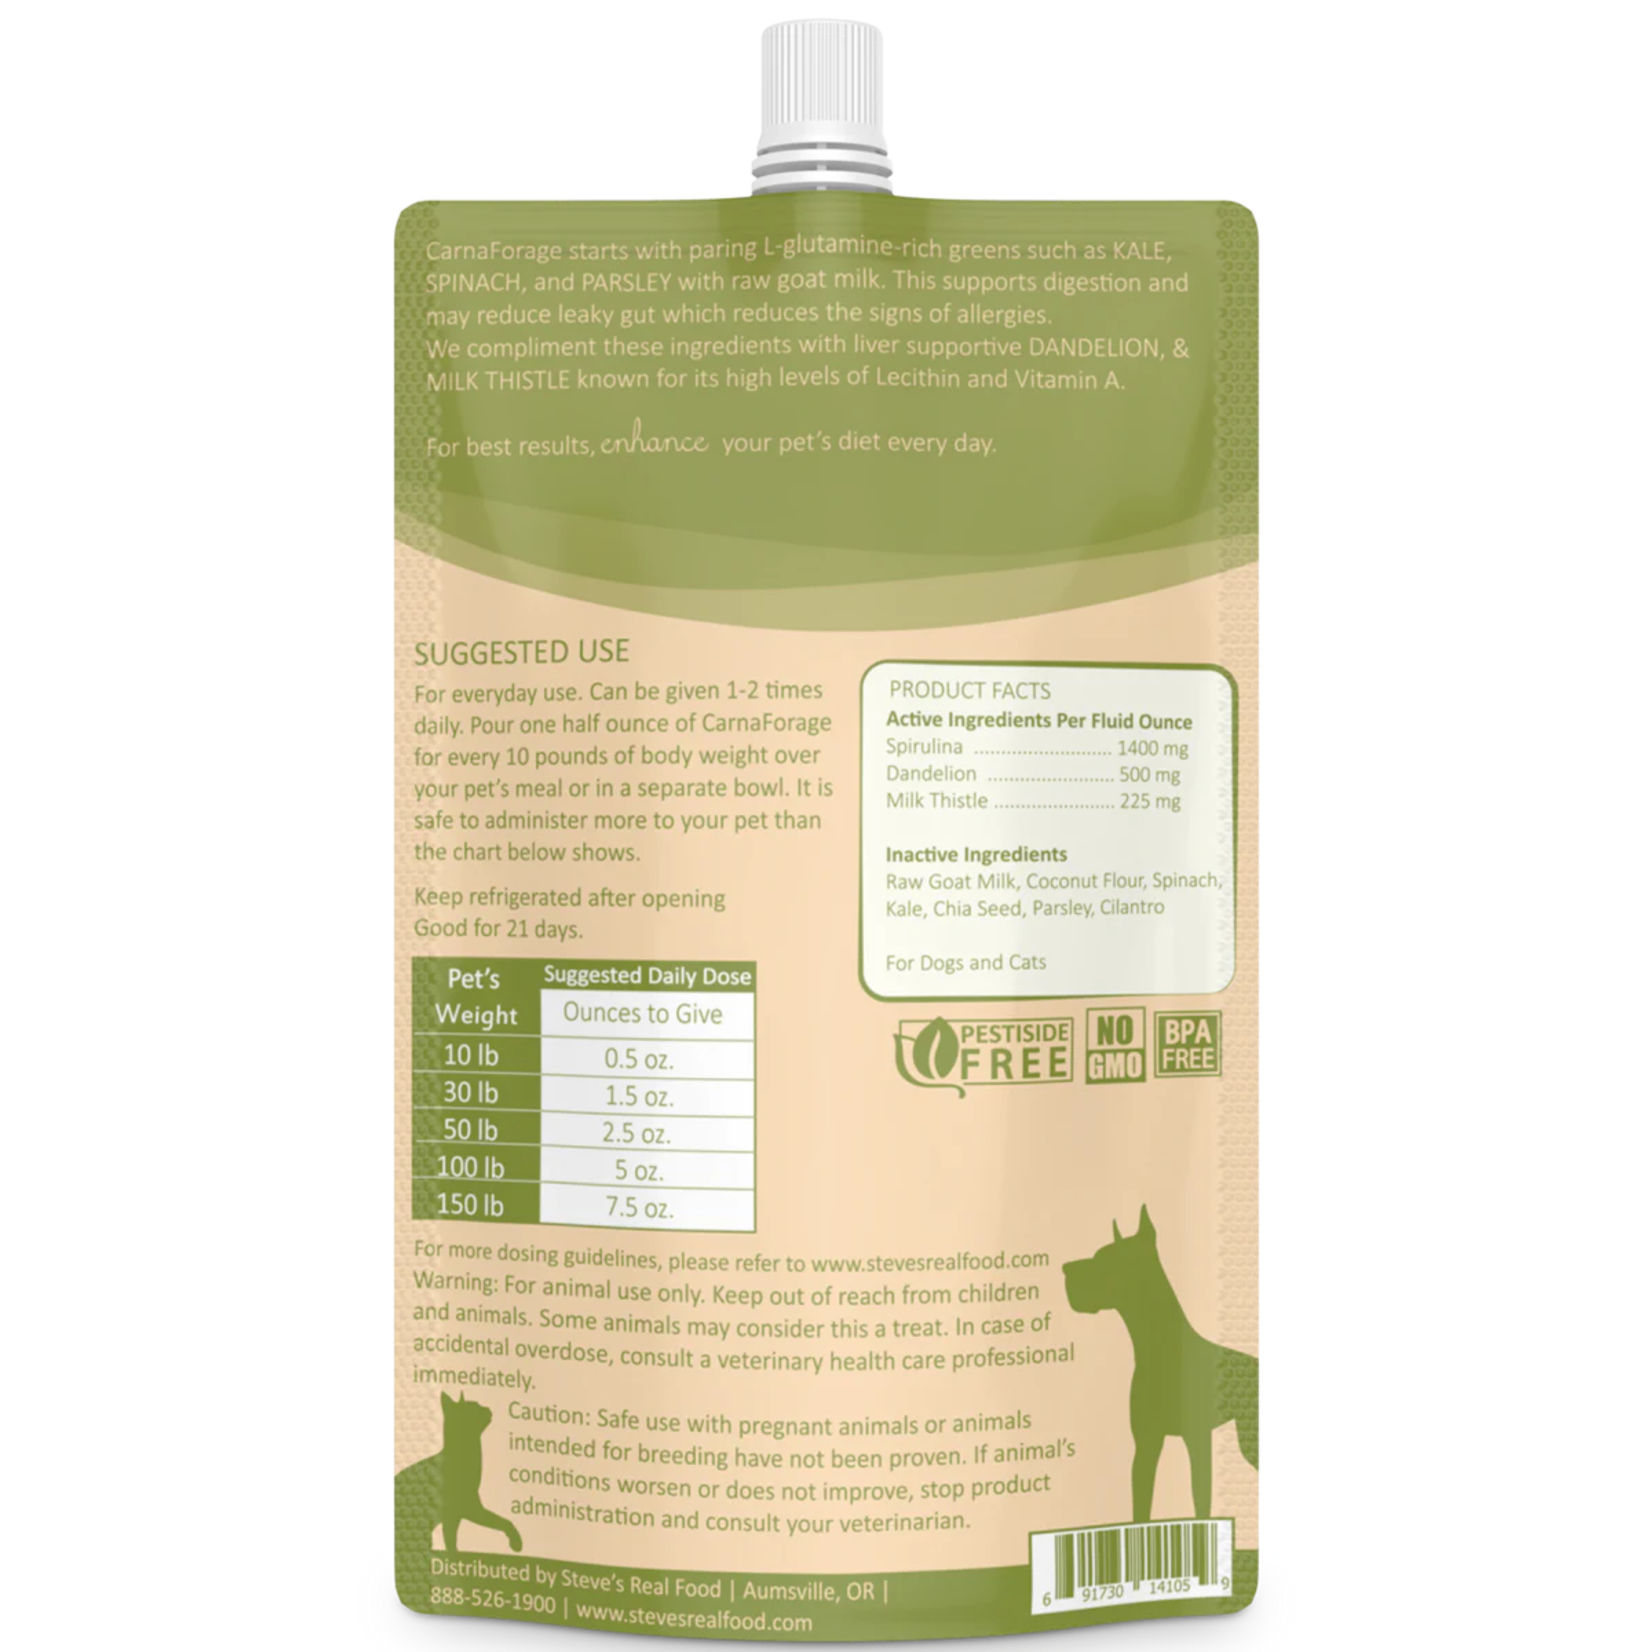 Steve's Real Food Steve's Real Food Enhance - CarnaForage Allergy Symptom Support for Dogs and Cats